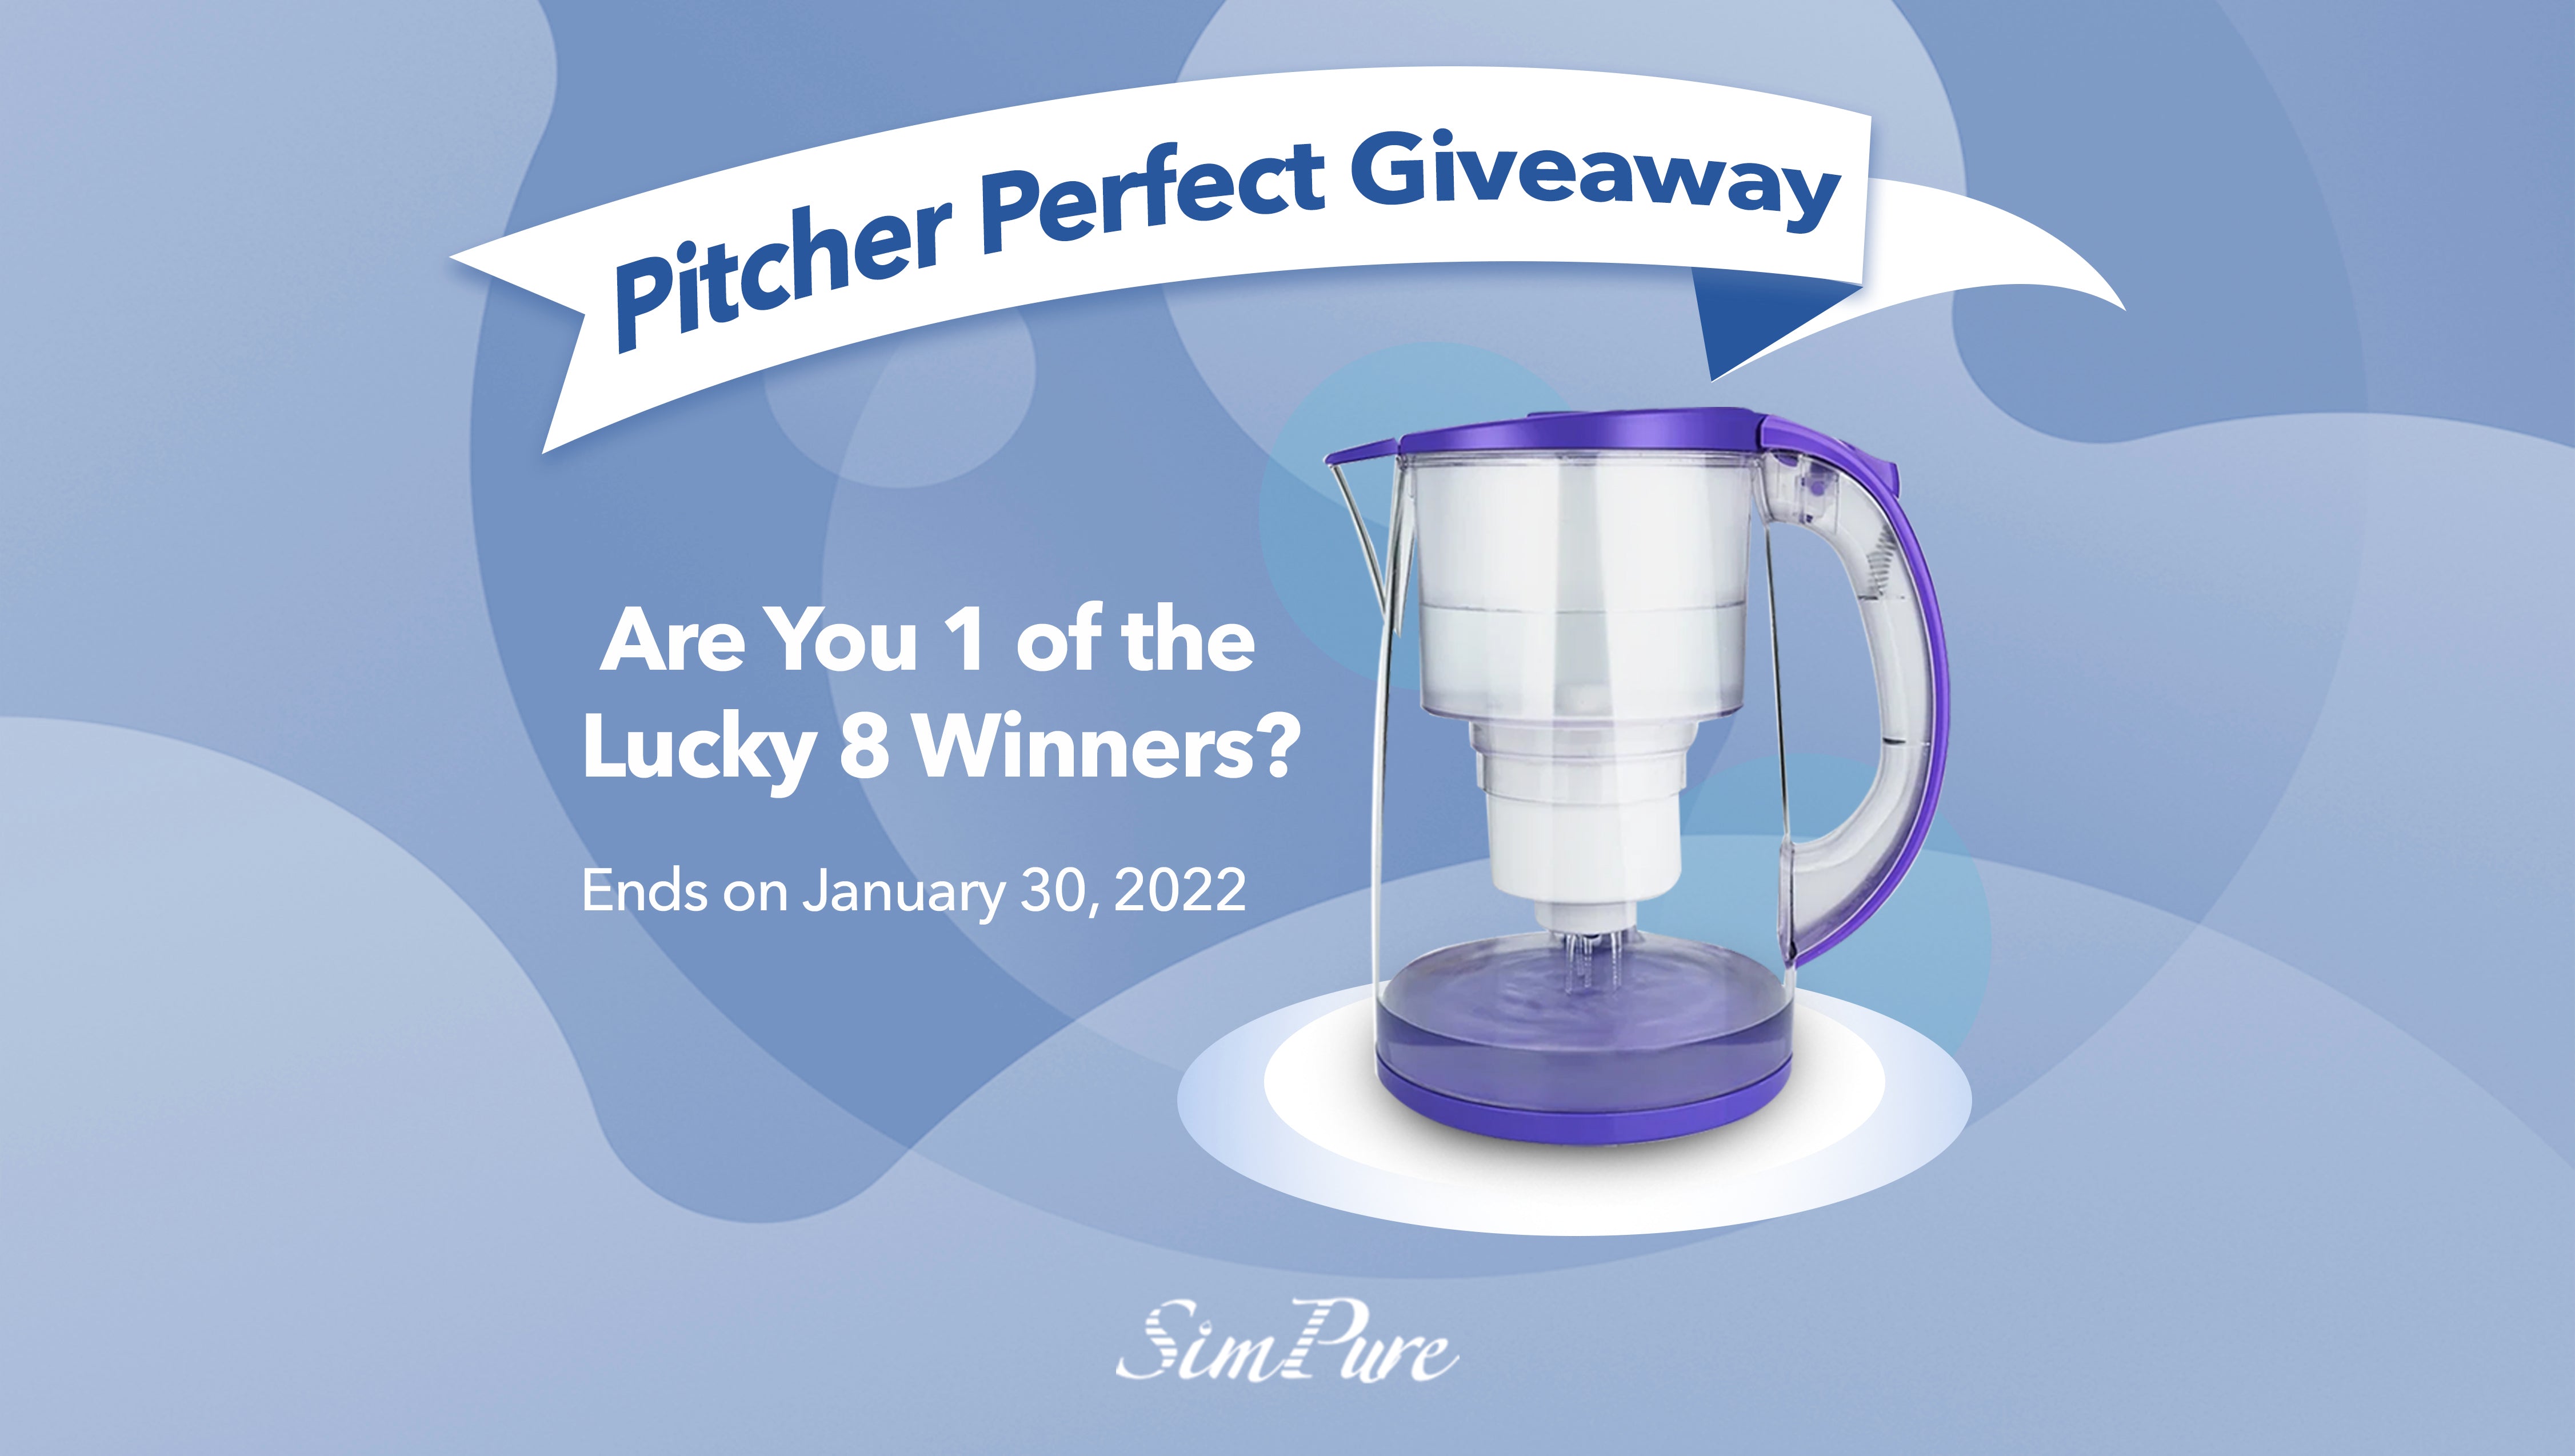 Win a Free Water Filtration Pitcher: SimPure’s Pitcher Perfect Giveaway